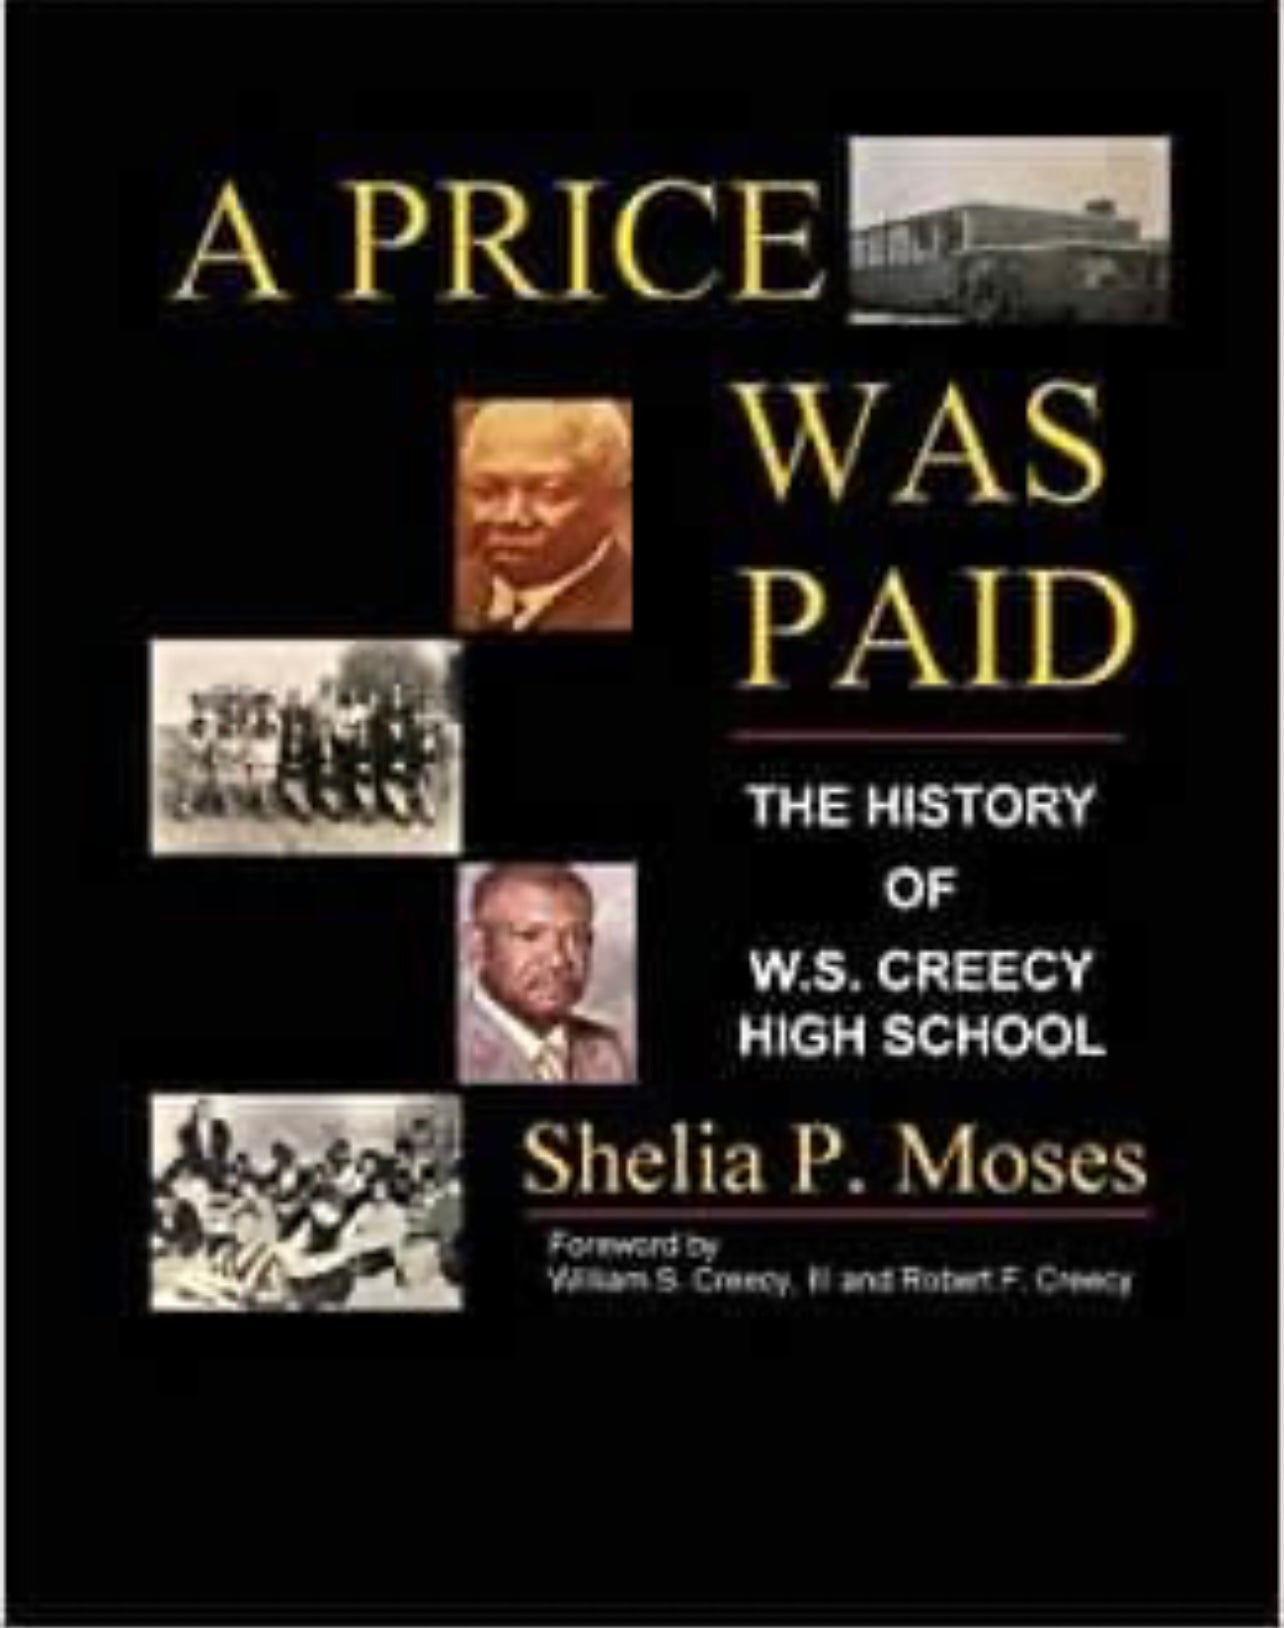 A Price Was Paid, The History of W.S. Creecy High School